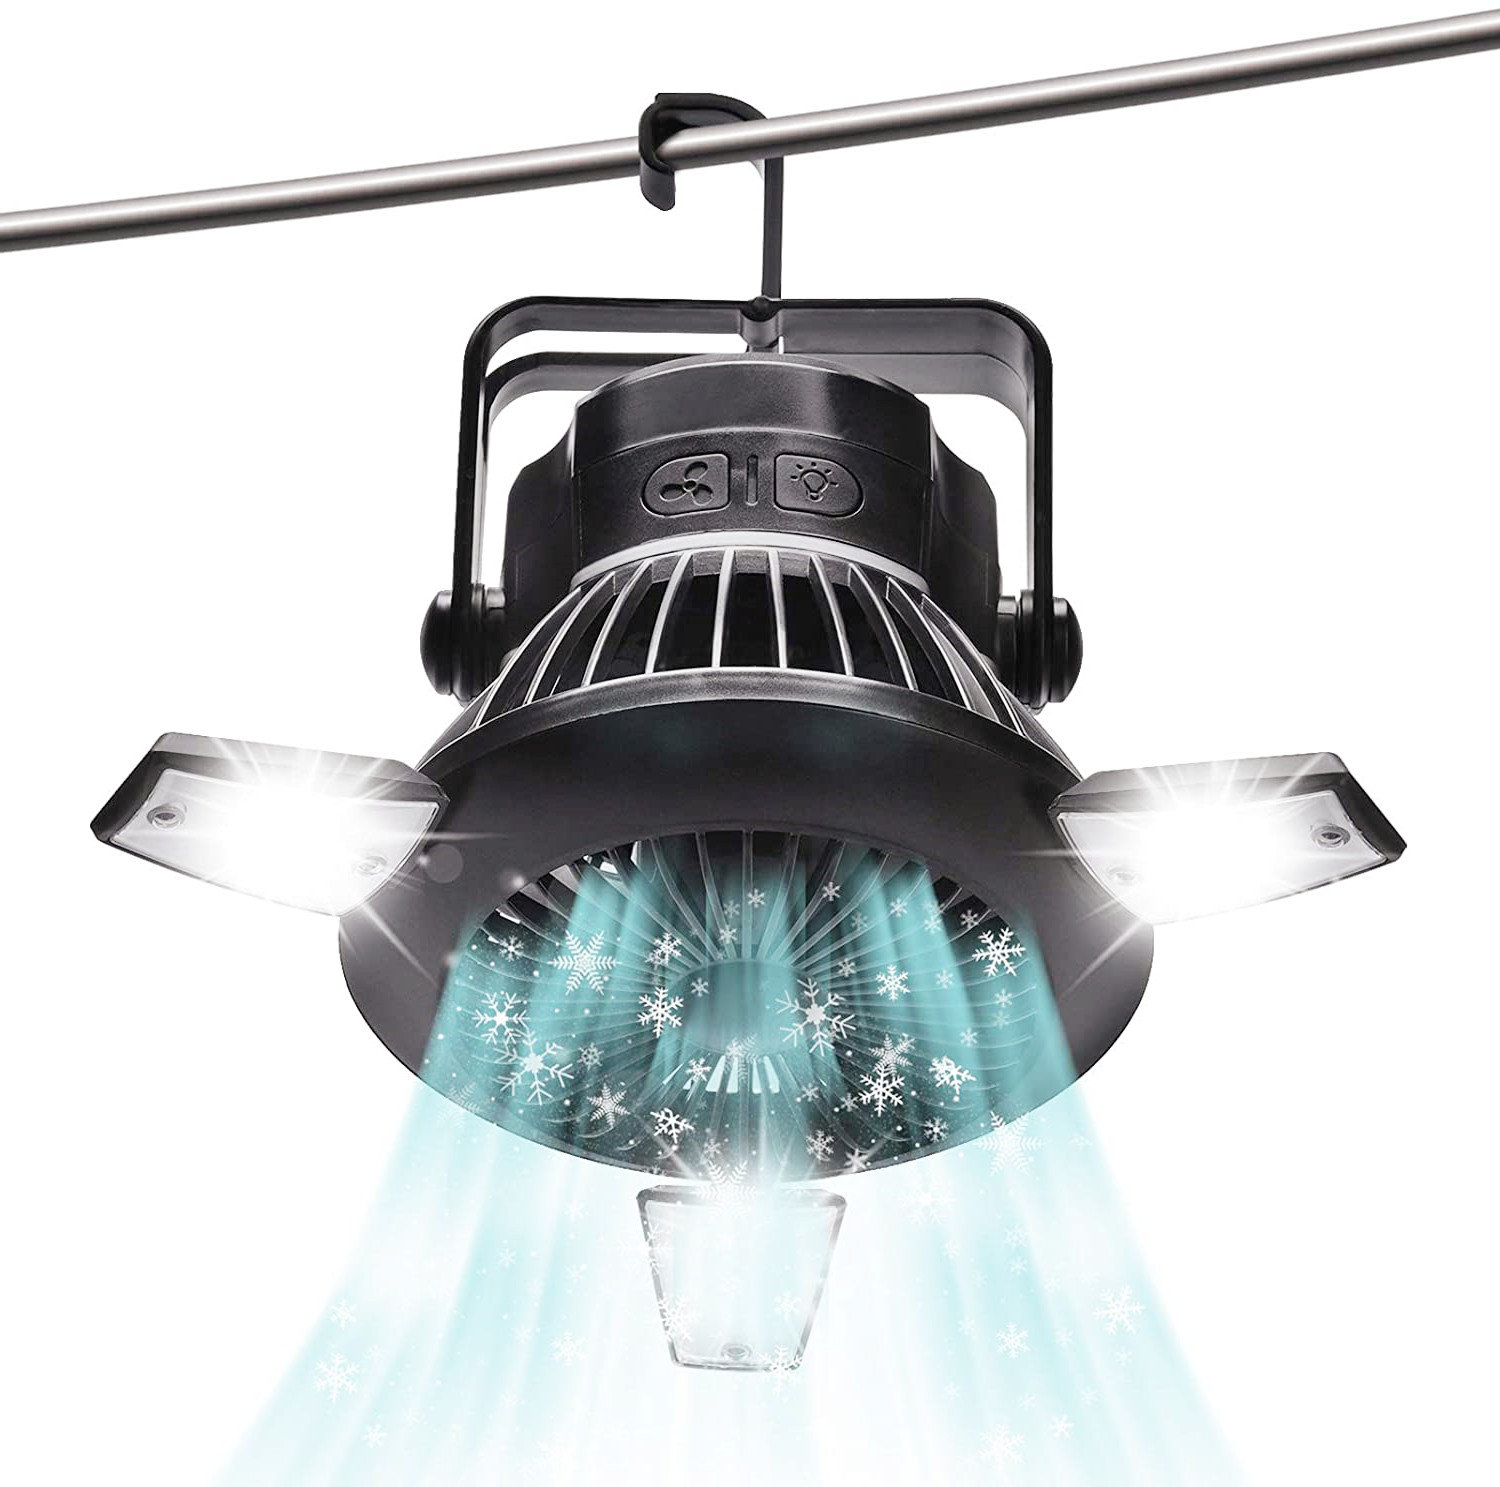 c&g outdoors Portable Led Camping Light With Ceiling Fan, 180 Silent,  Suitable For Fishing, Home And Office